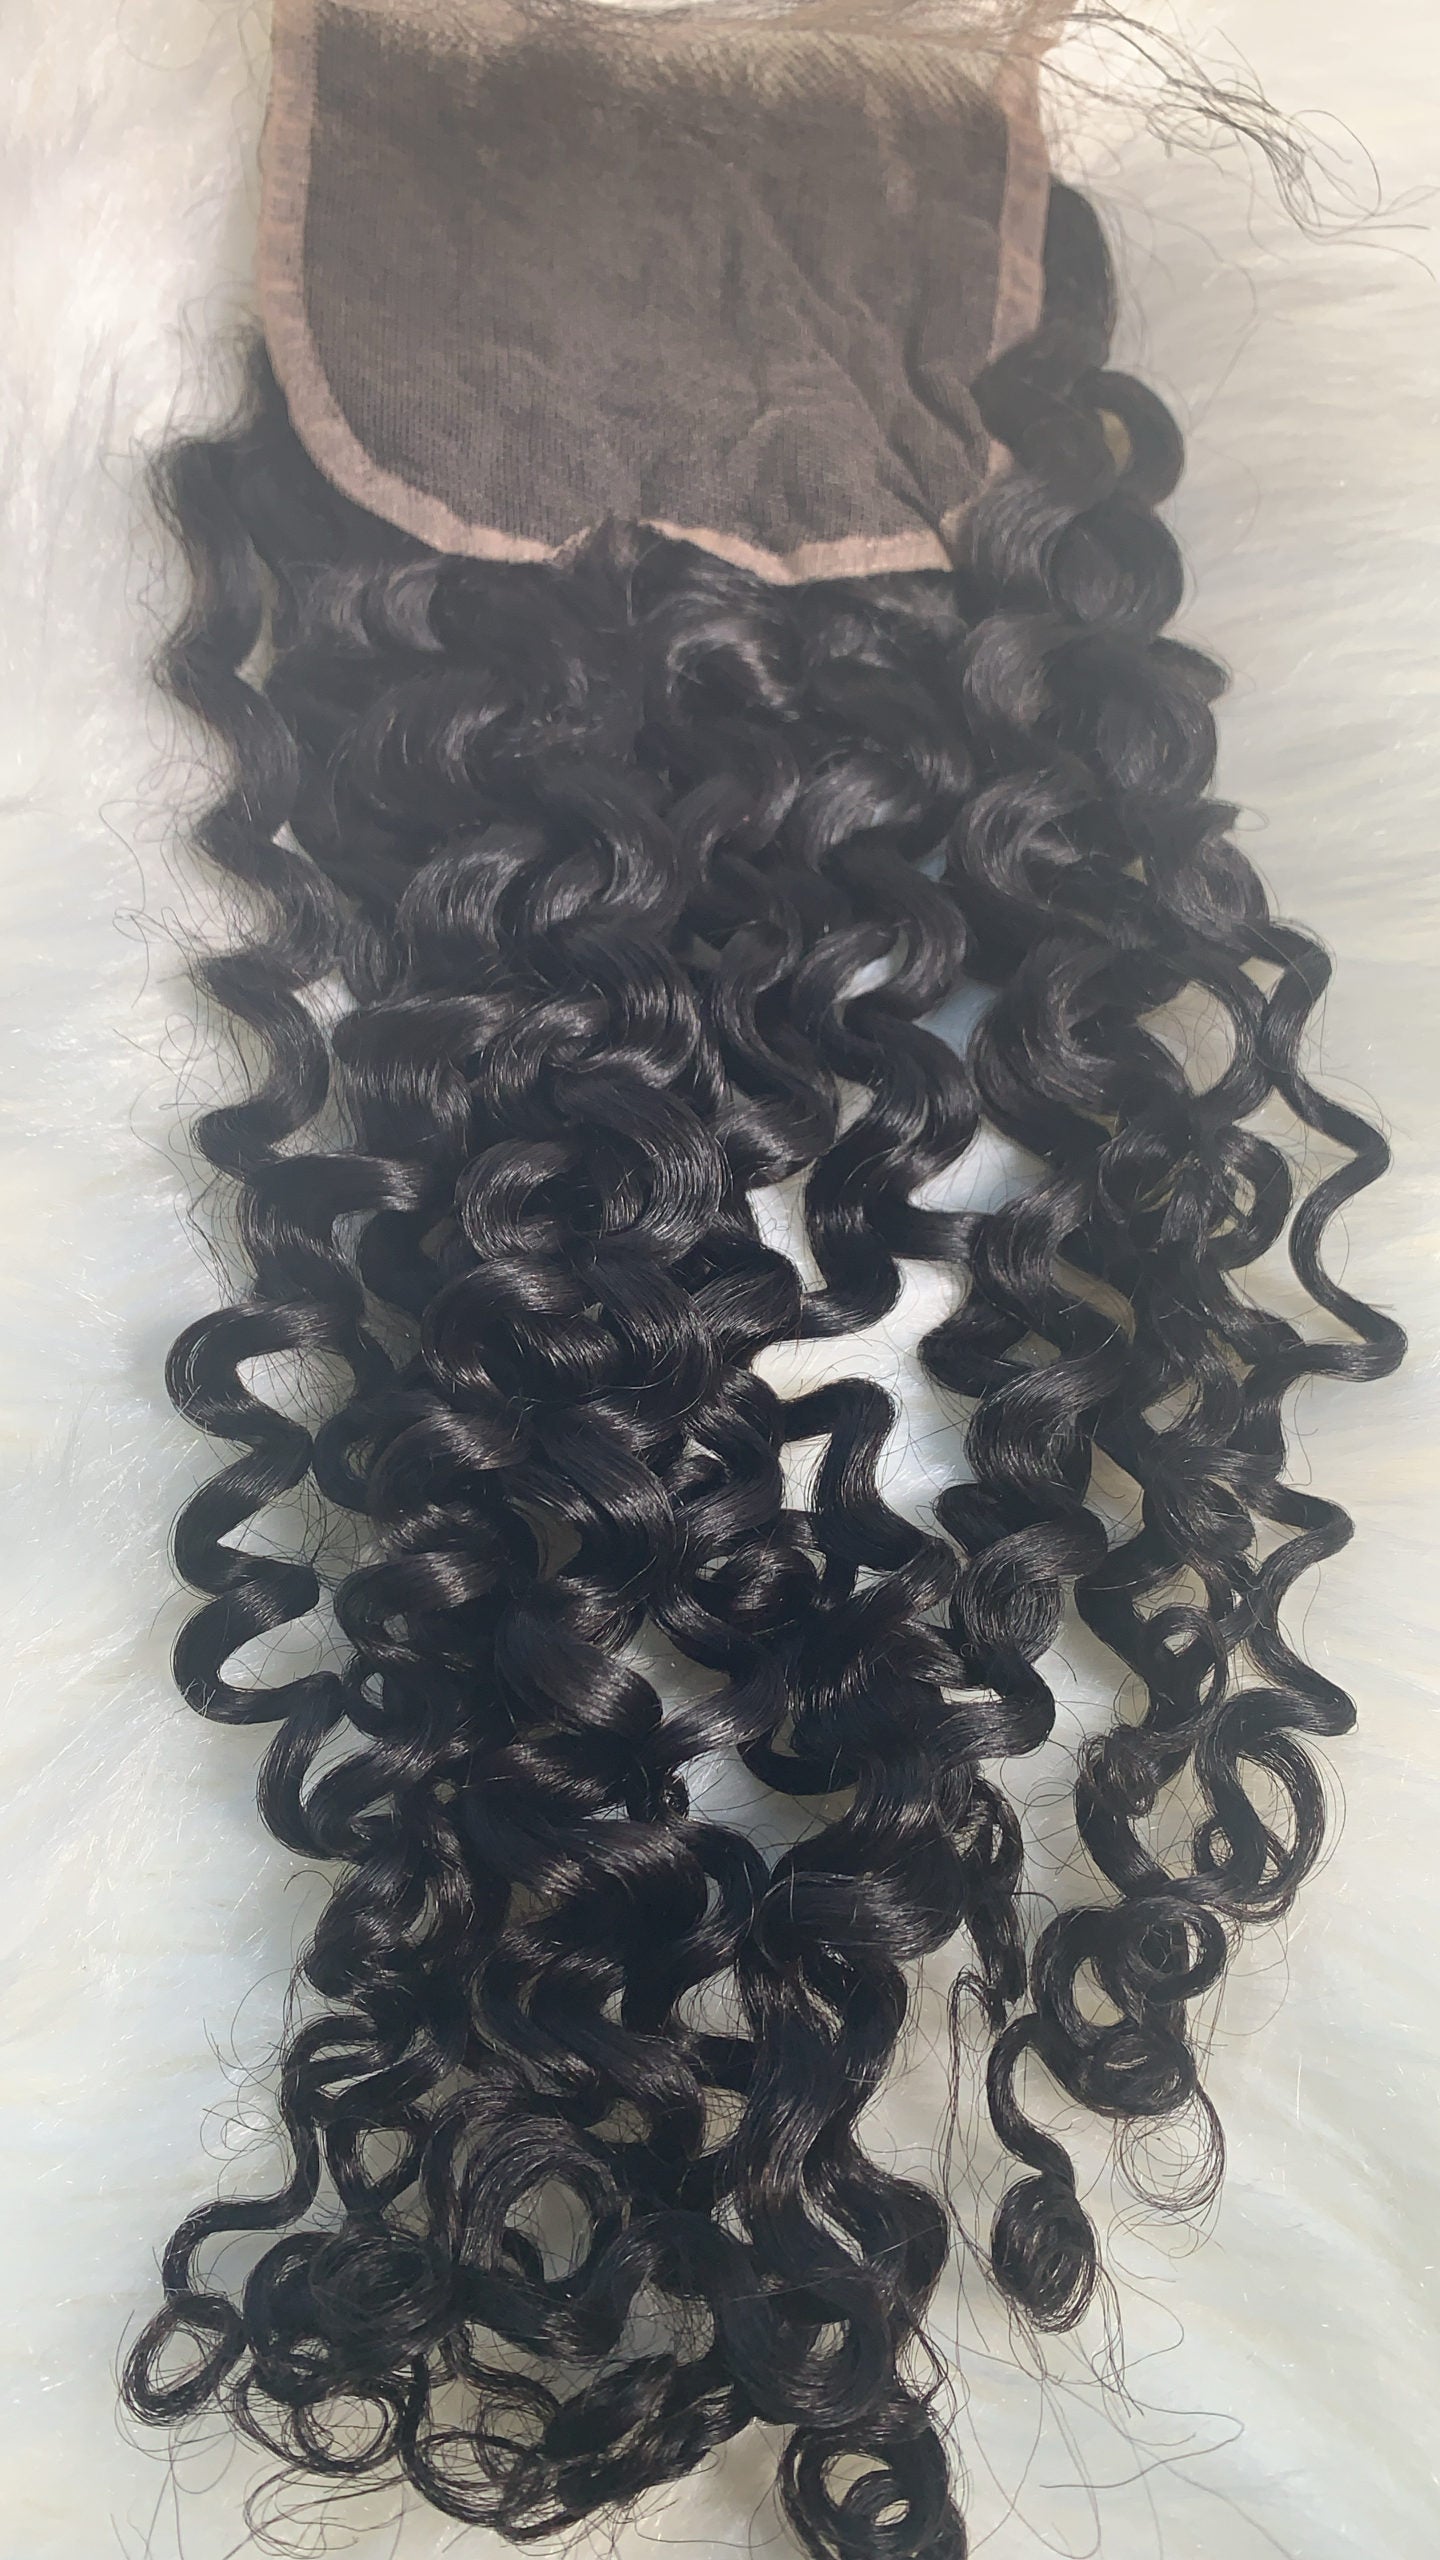 INVISILACE™ 5 by 5 CLOSURE (CURLY) - The Frontal Queen